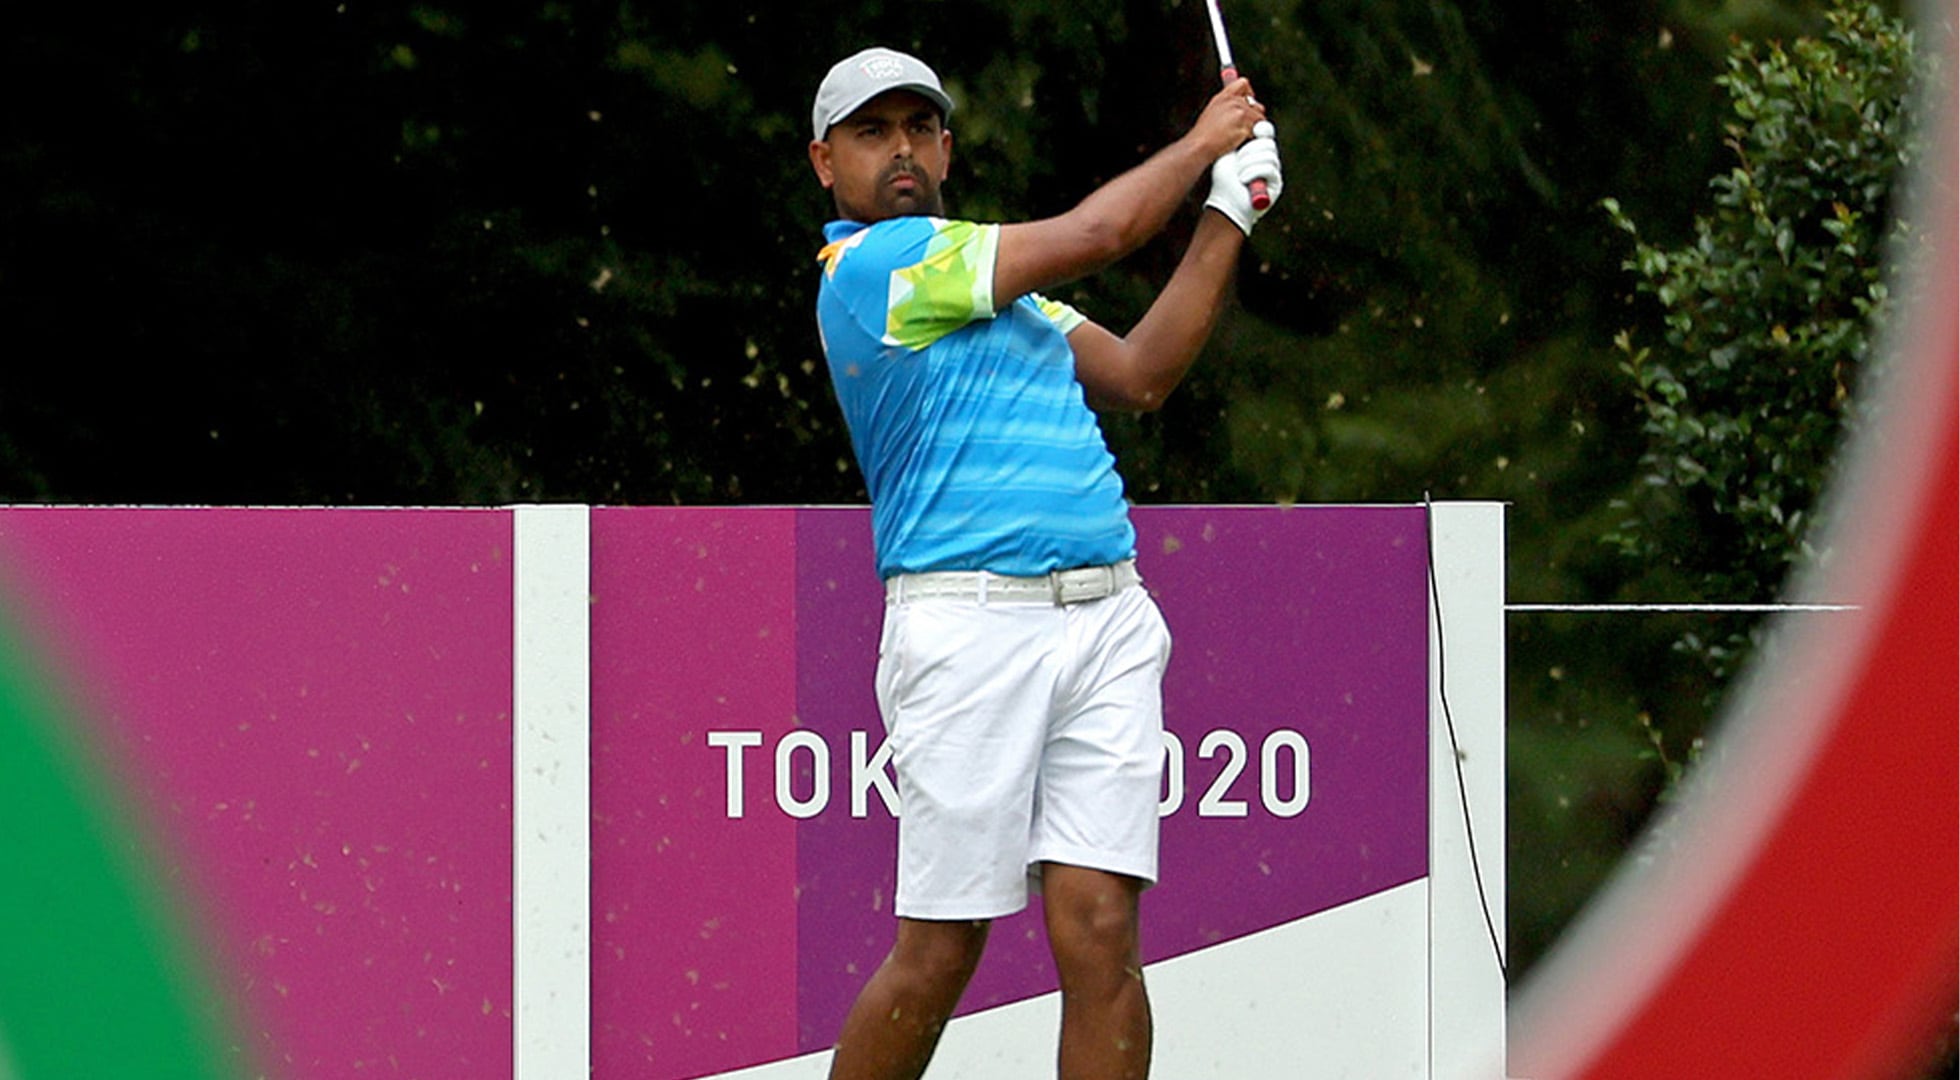 Despite Tour struggles for Anirban Lahiri, he’s not ‘selfless’ for playing in Olympics